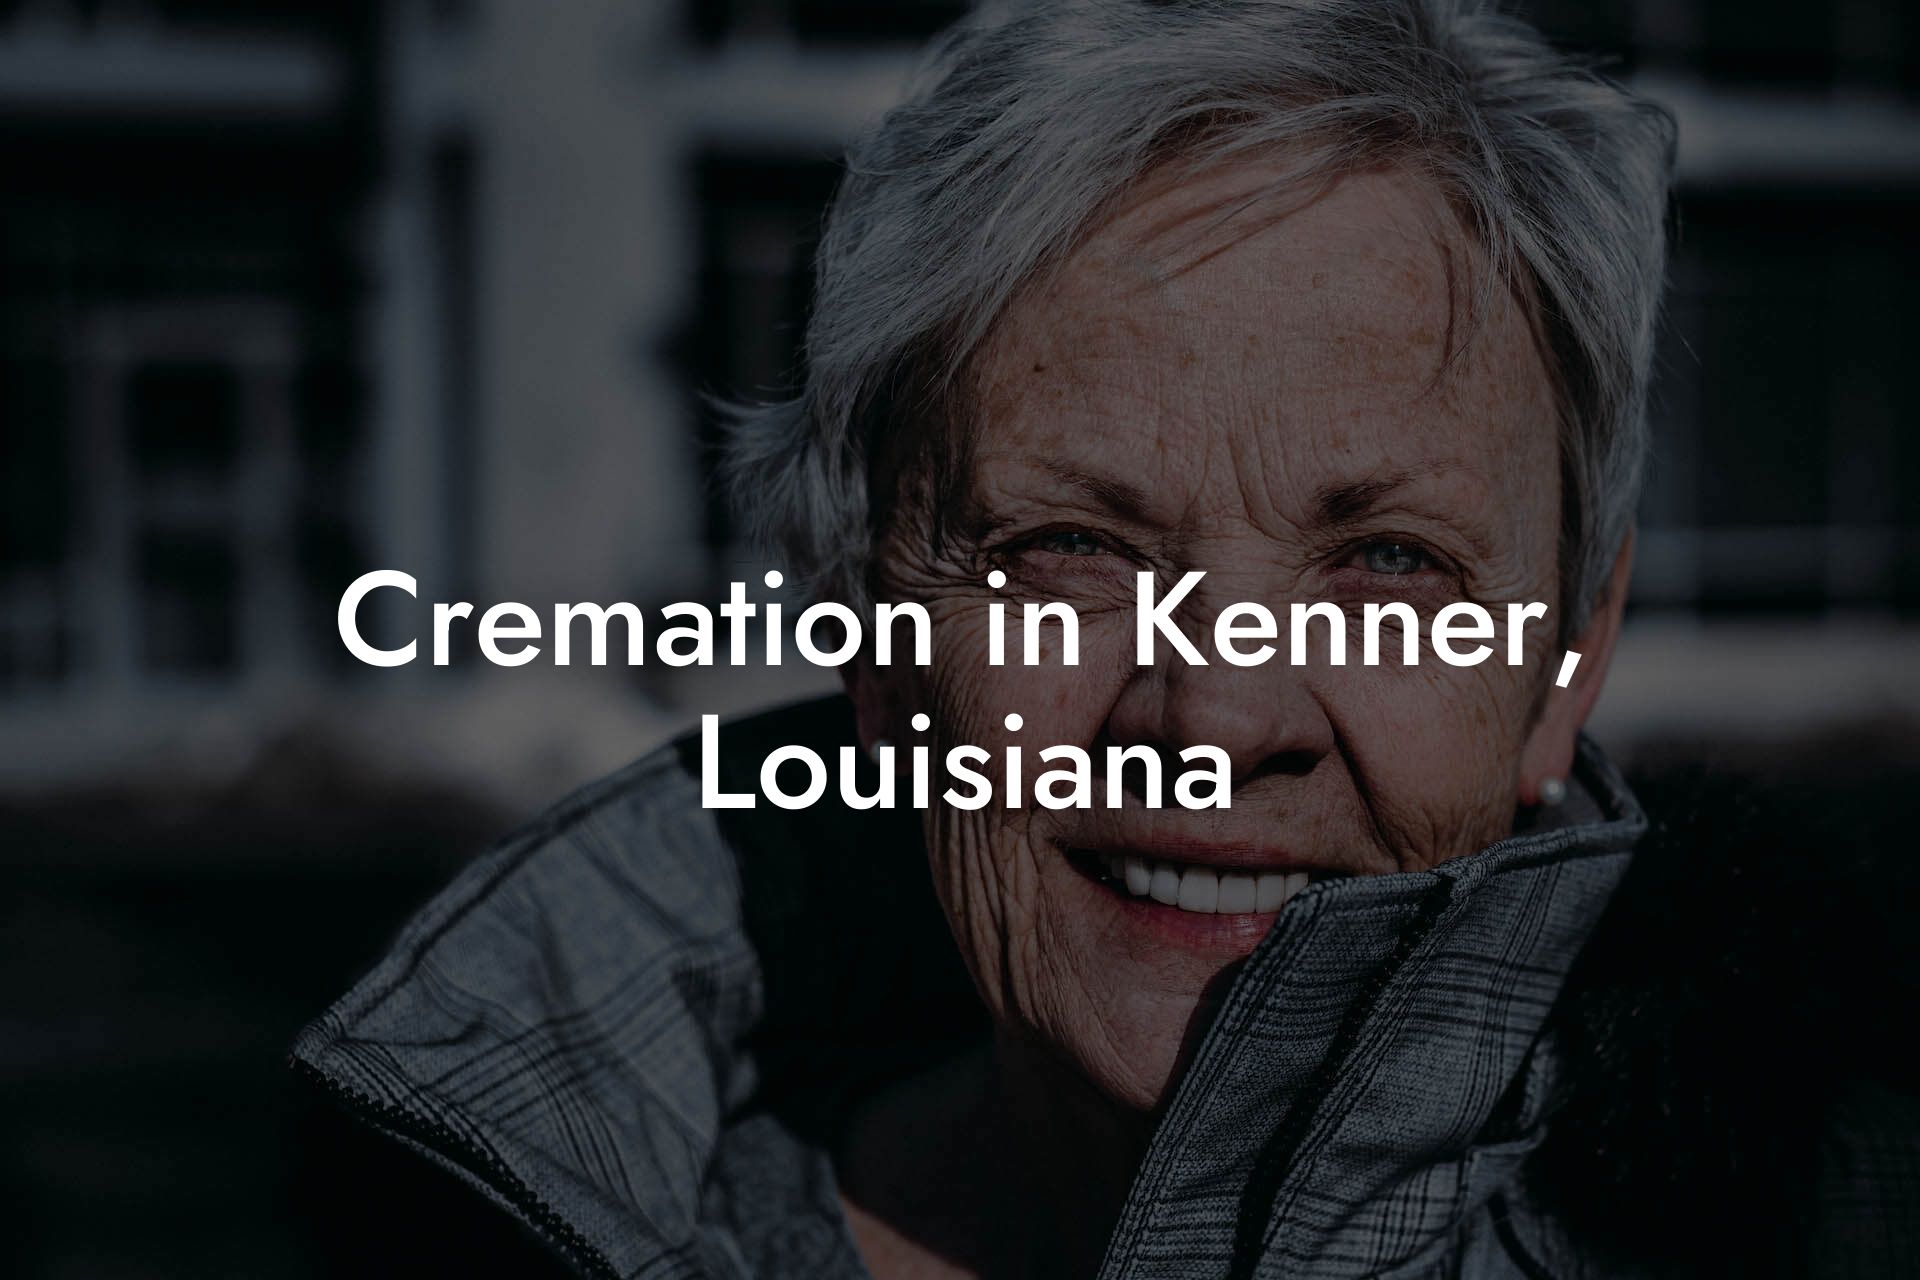 Cremation in Kenner, Louisiana